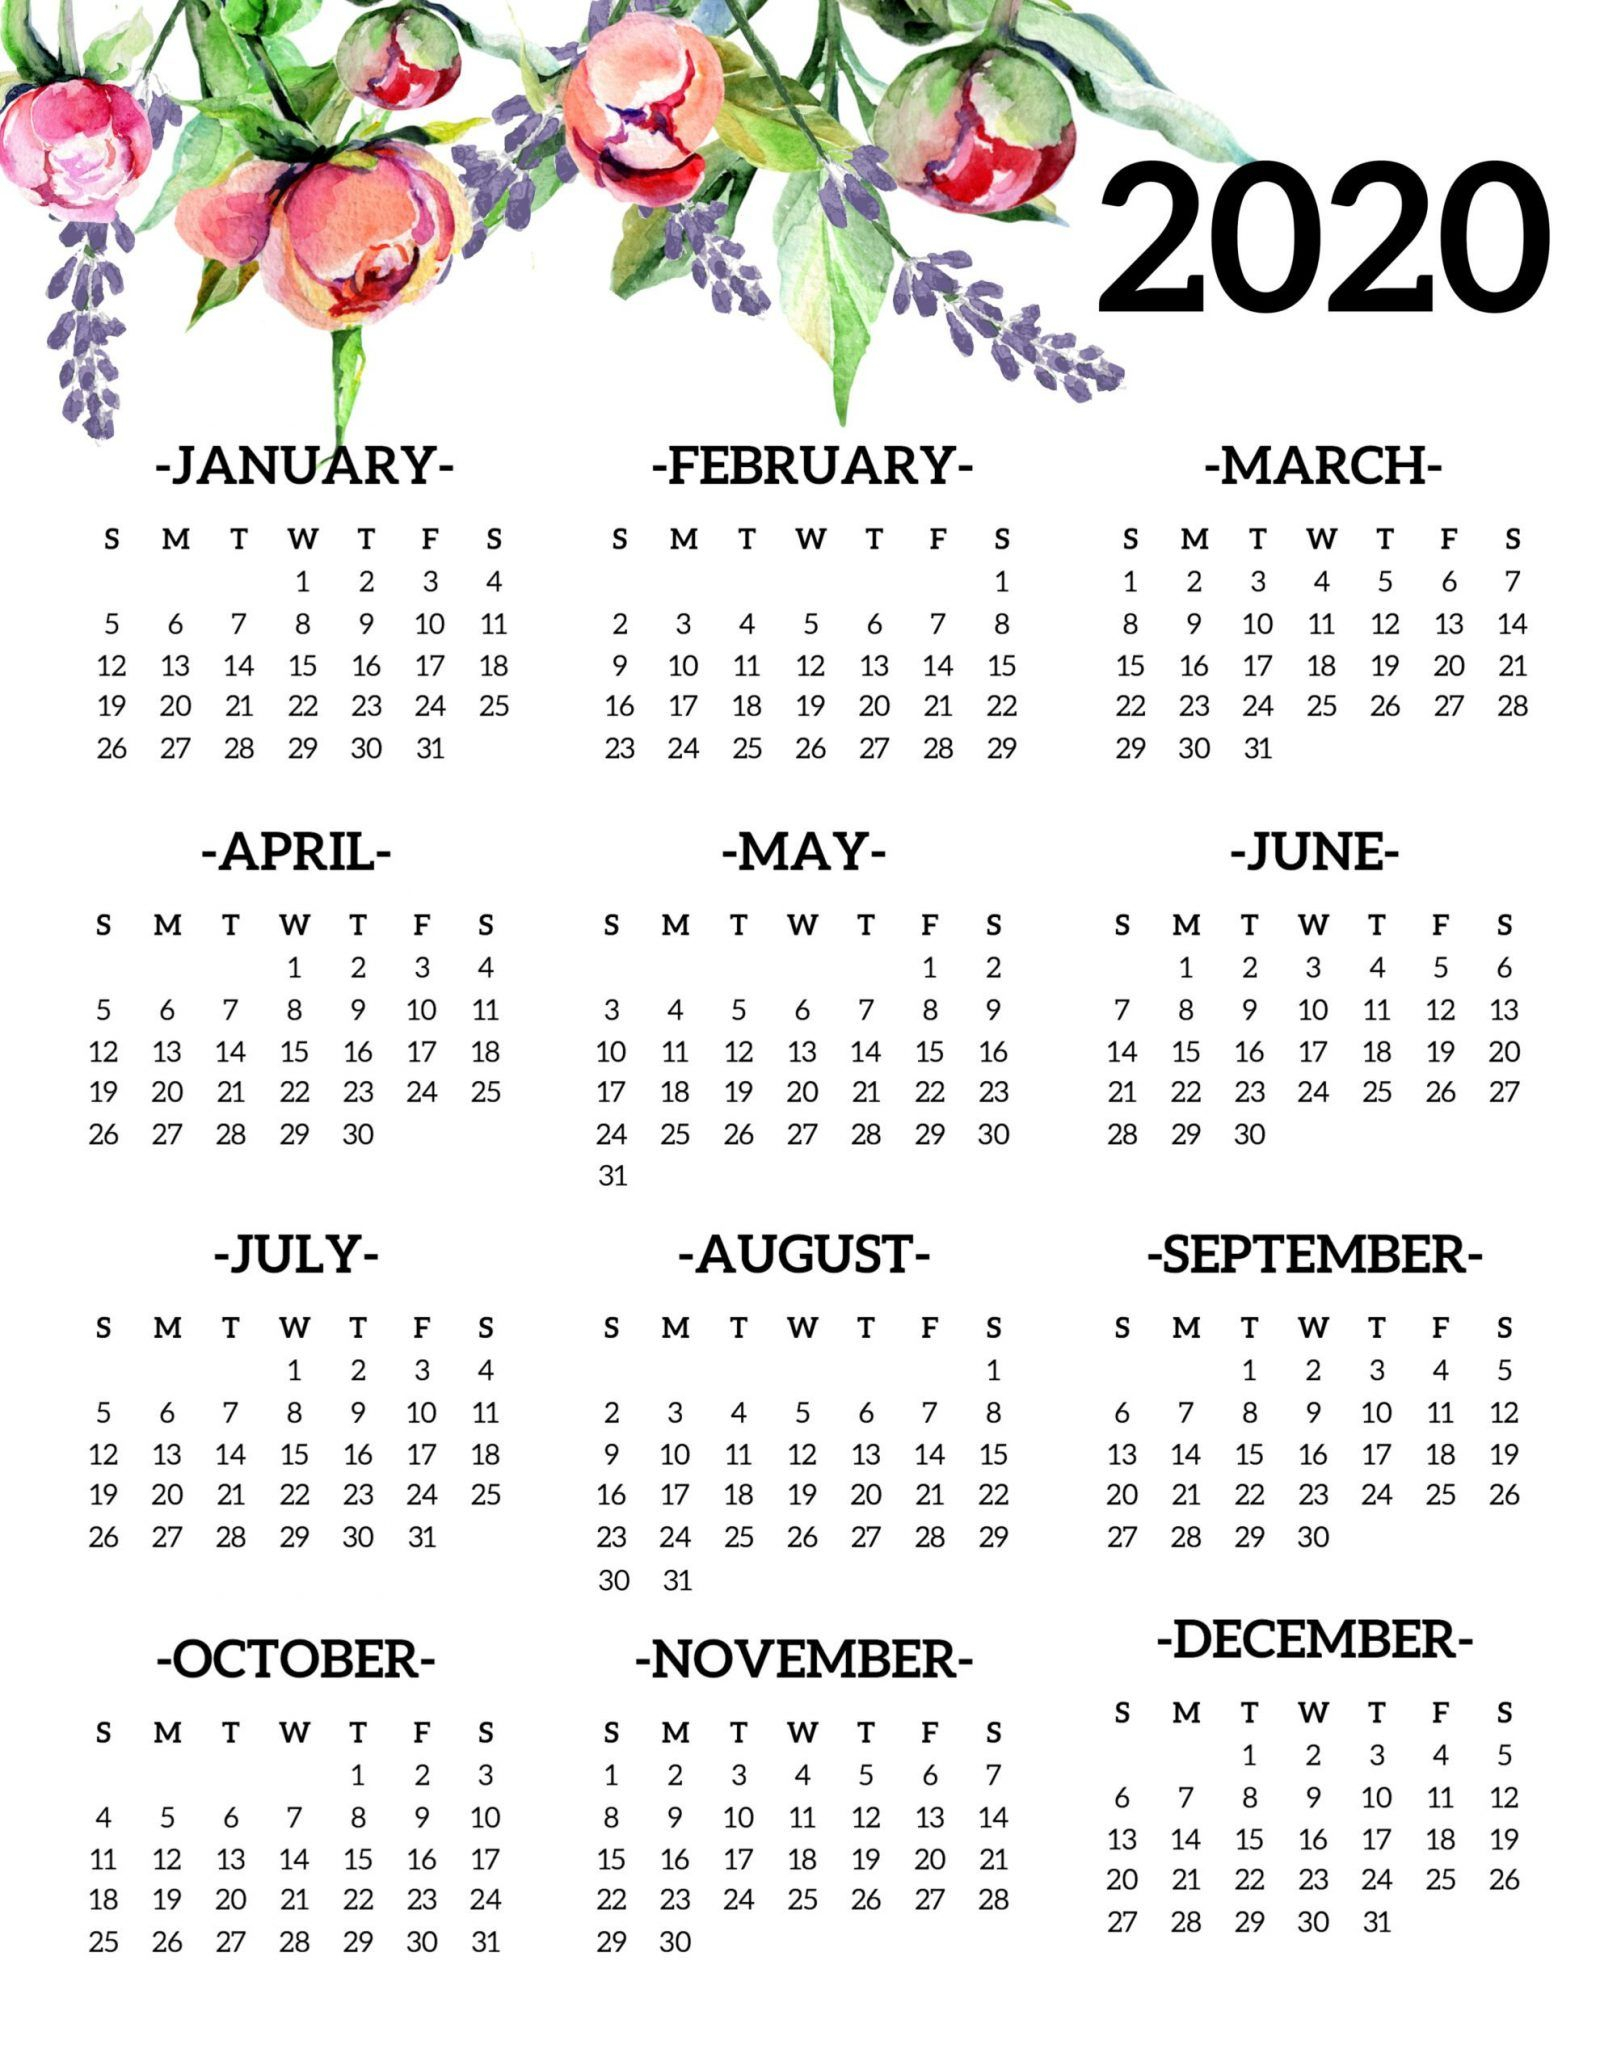 2021 Free Printable Calendars - 20+ Designs For Monthly